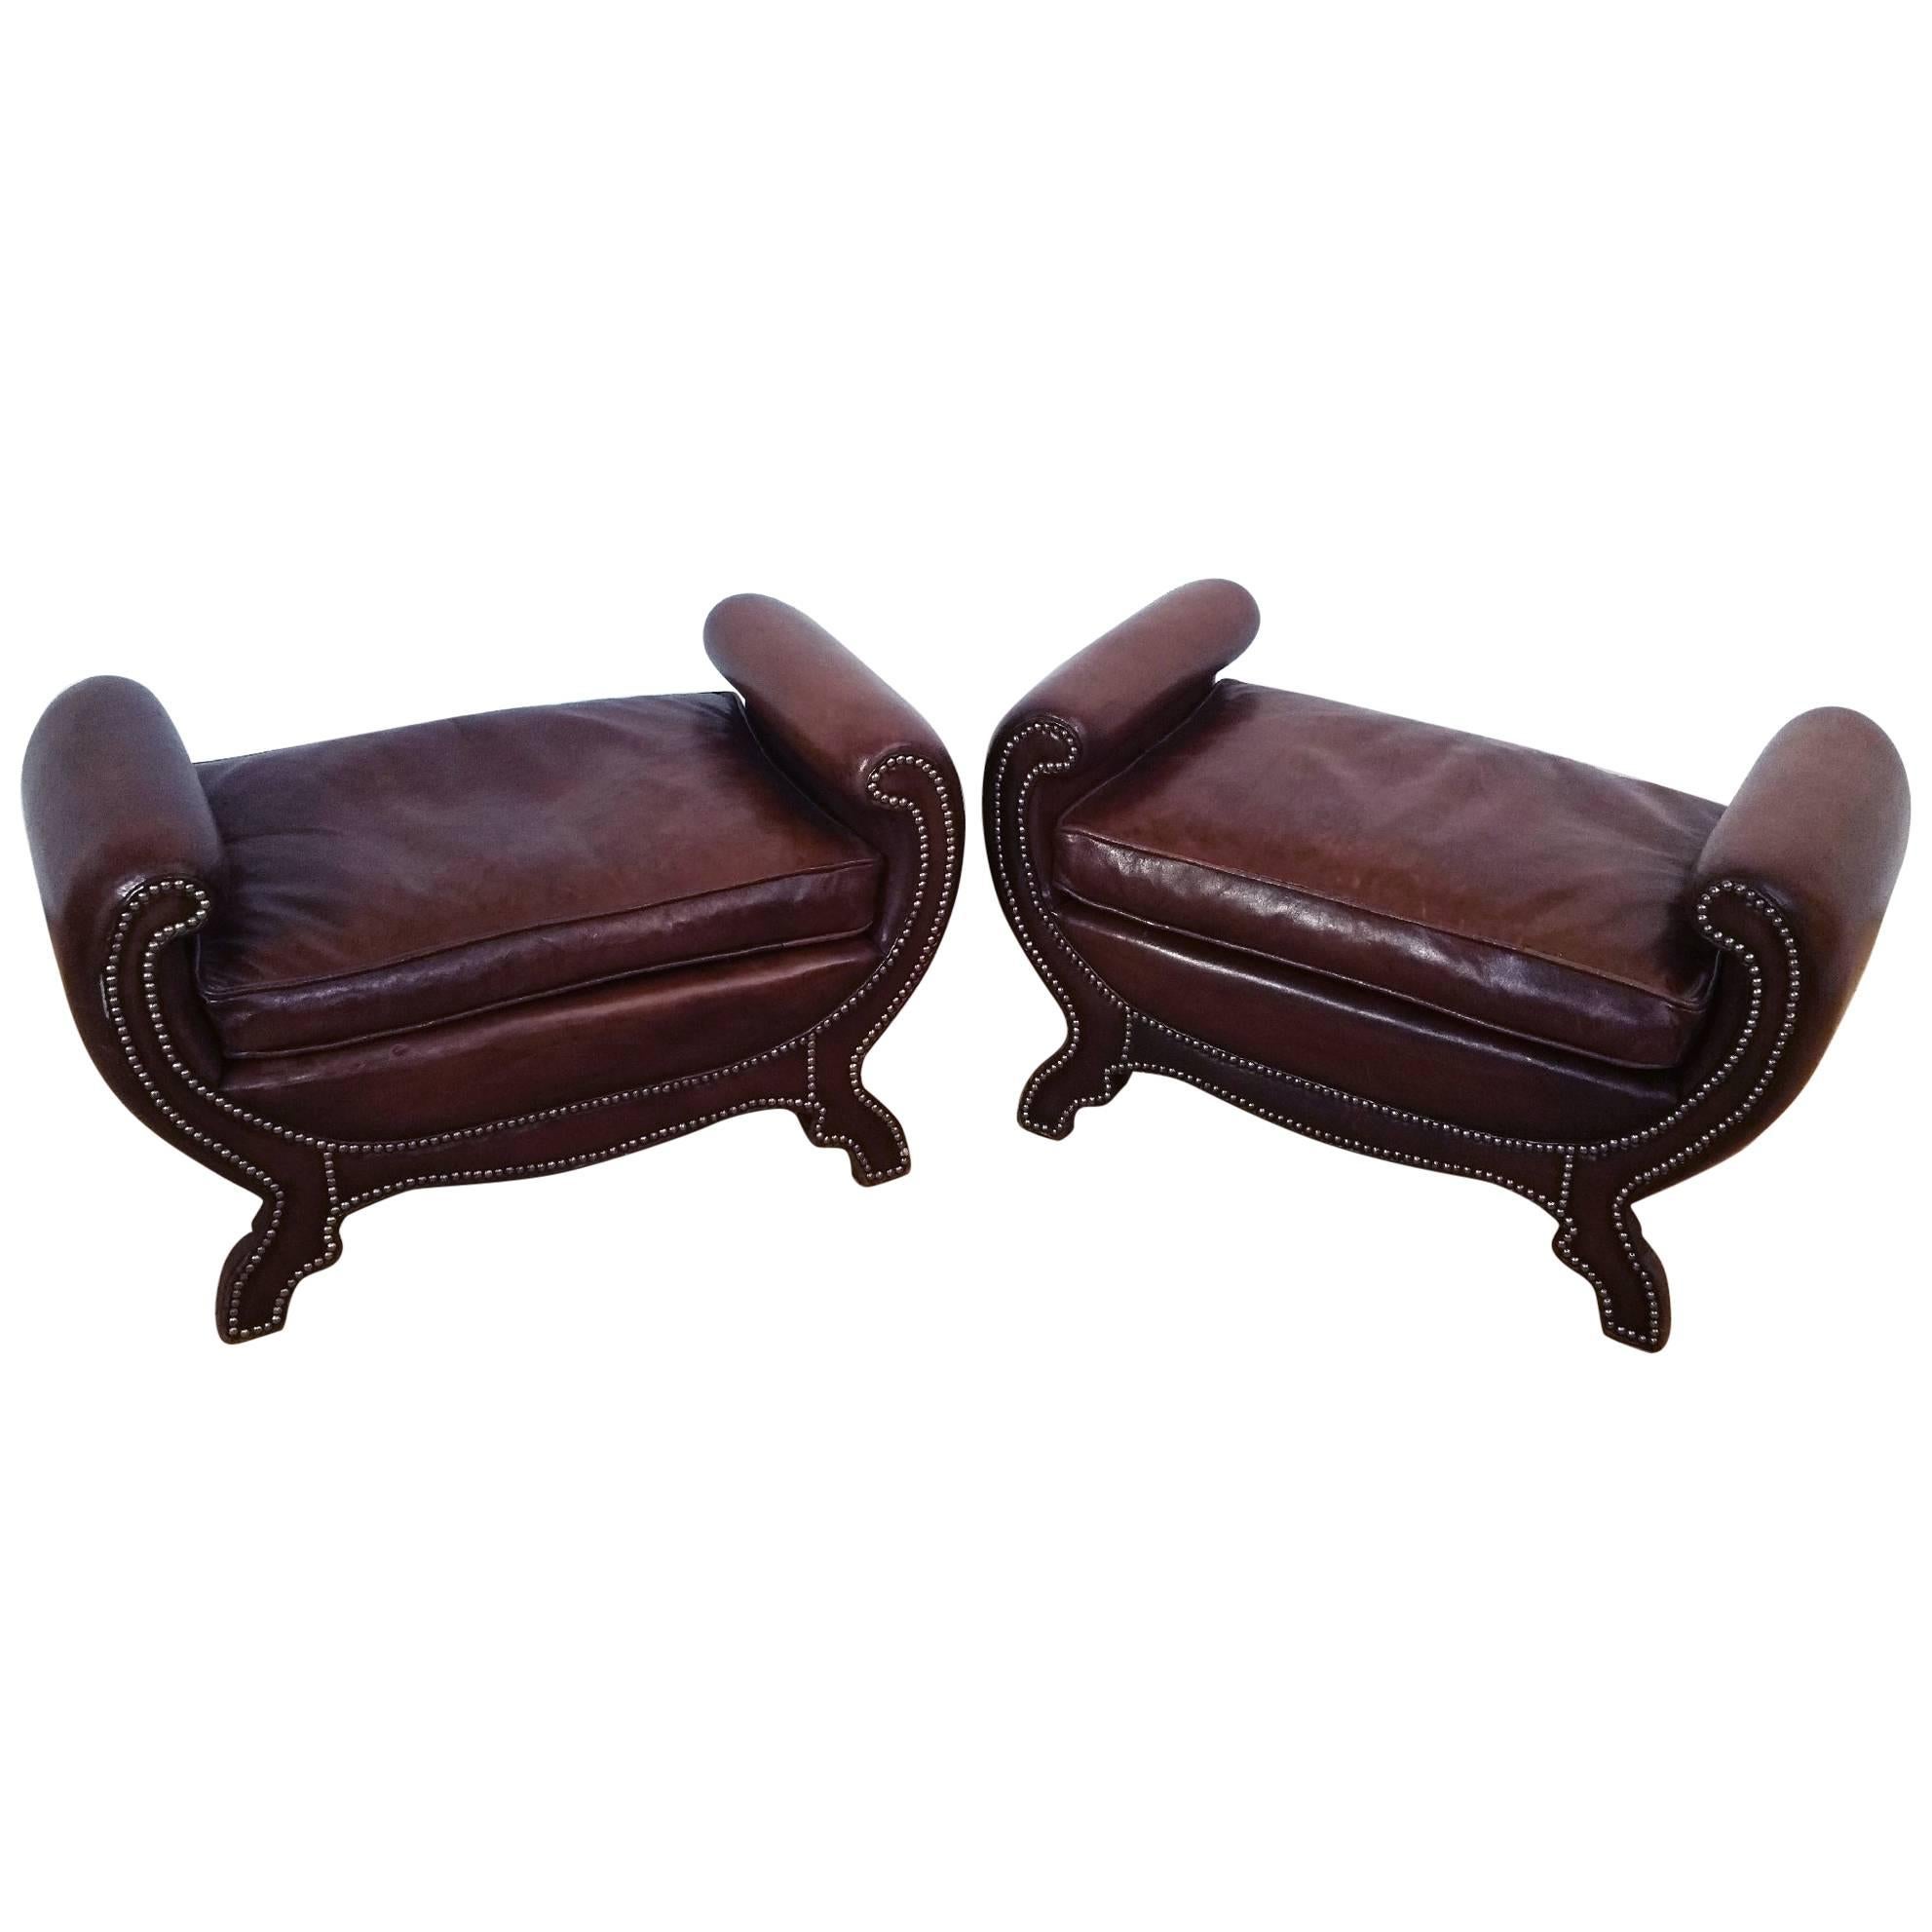 Pair of Regency Style Leather Upholstered Window Seats